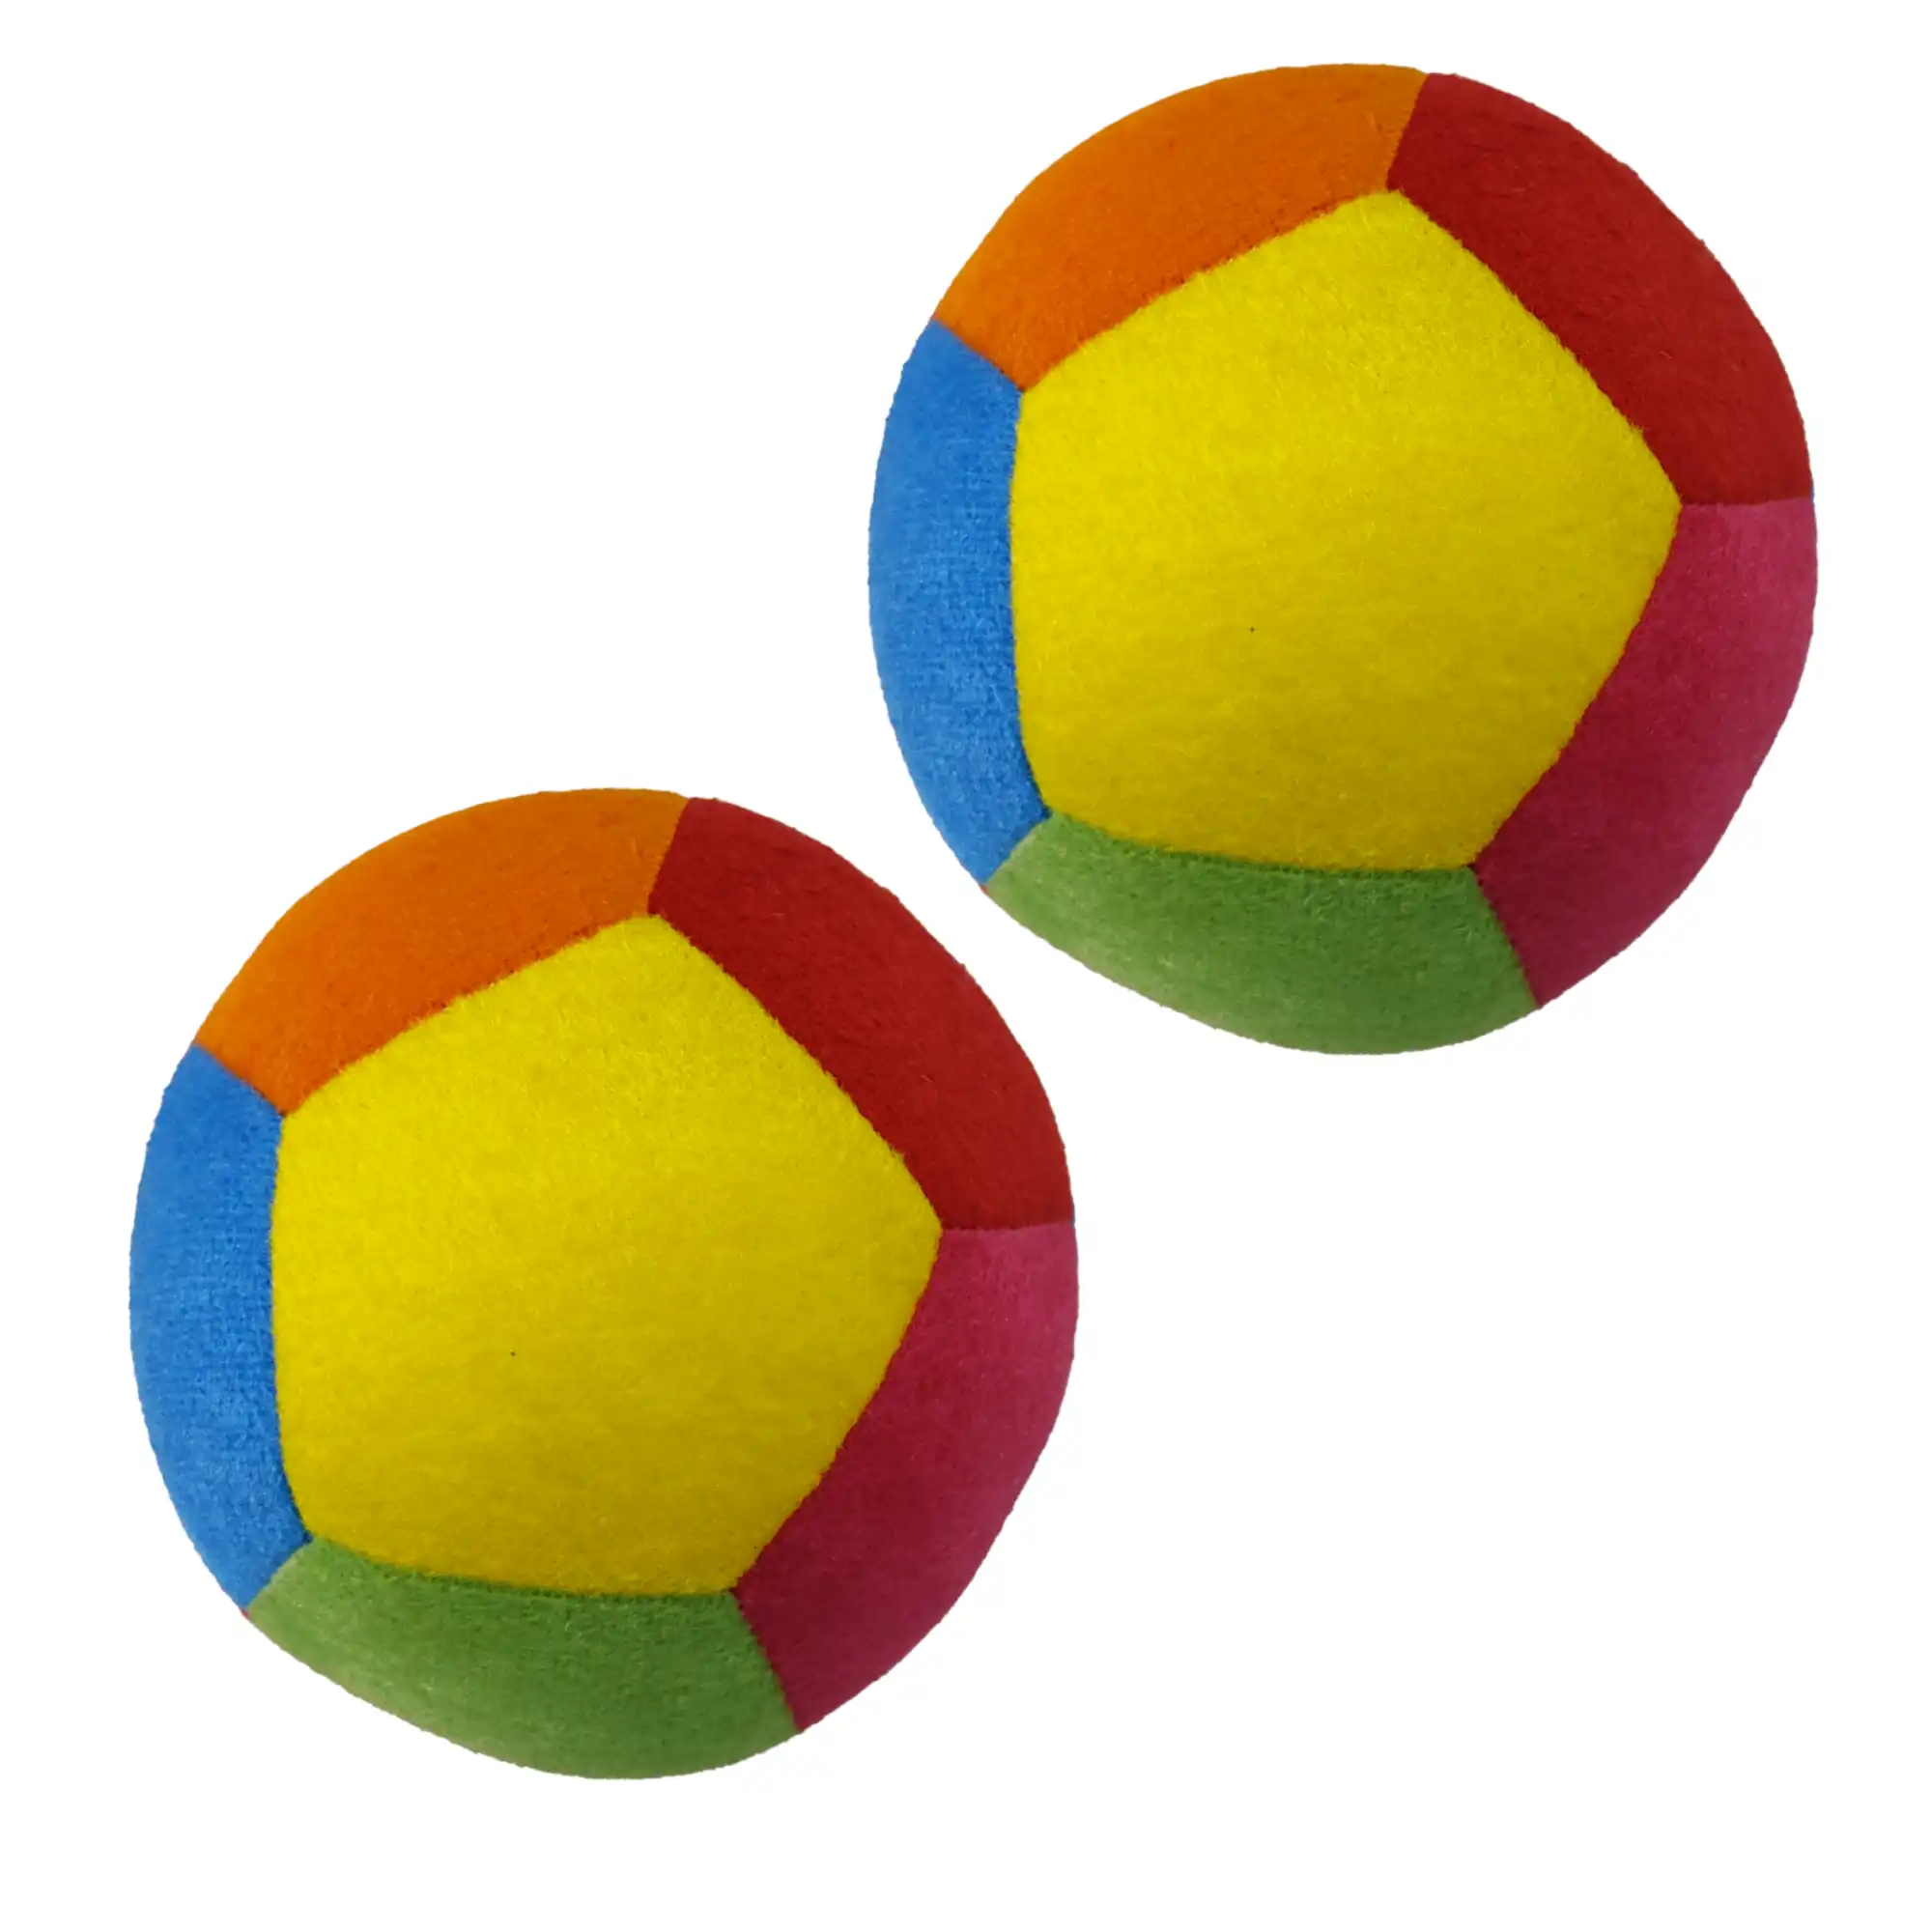 Soft Plush Ball For Kids With Rattle Sound 3